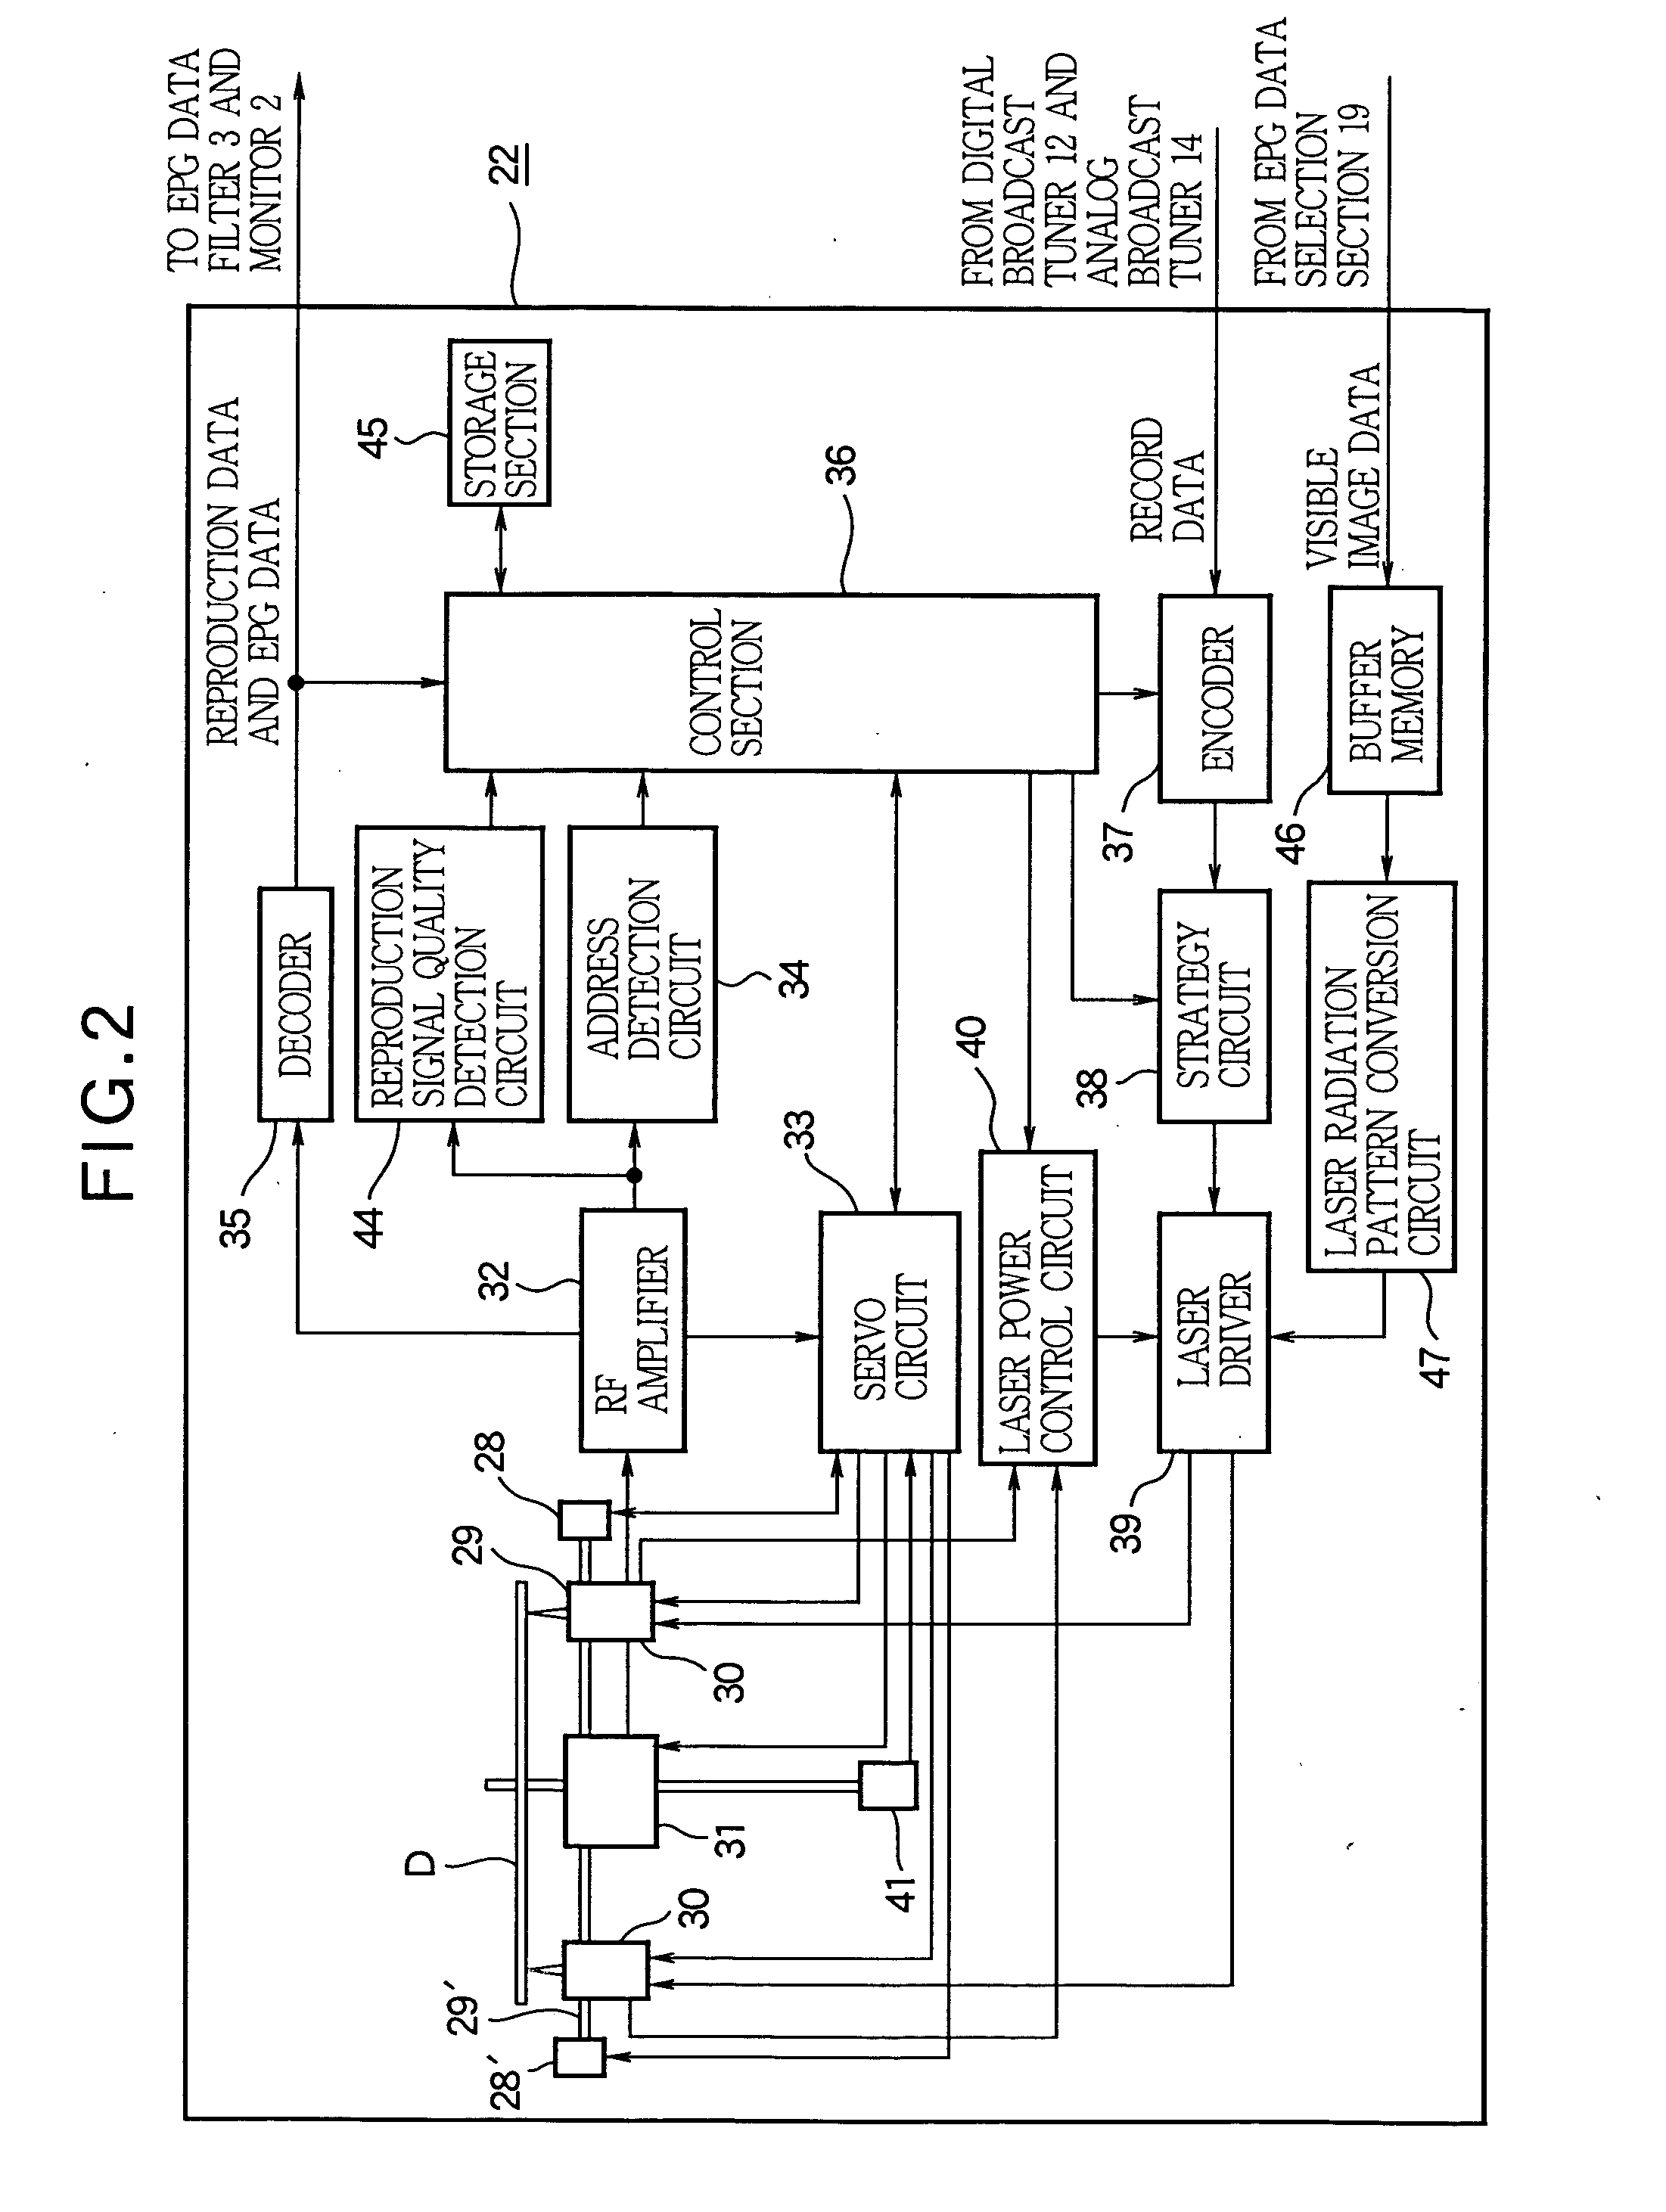 Optical disk apparatus capable of recording broadcast program with visible symbol